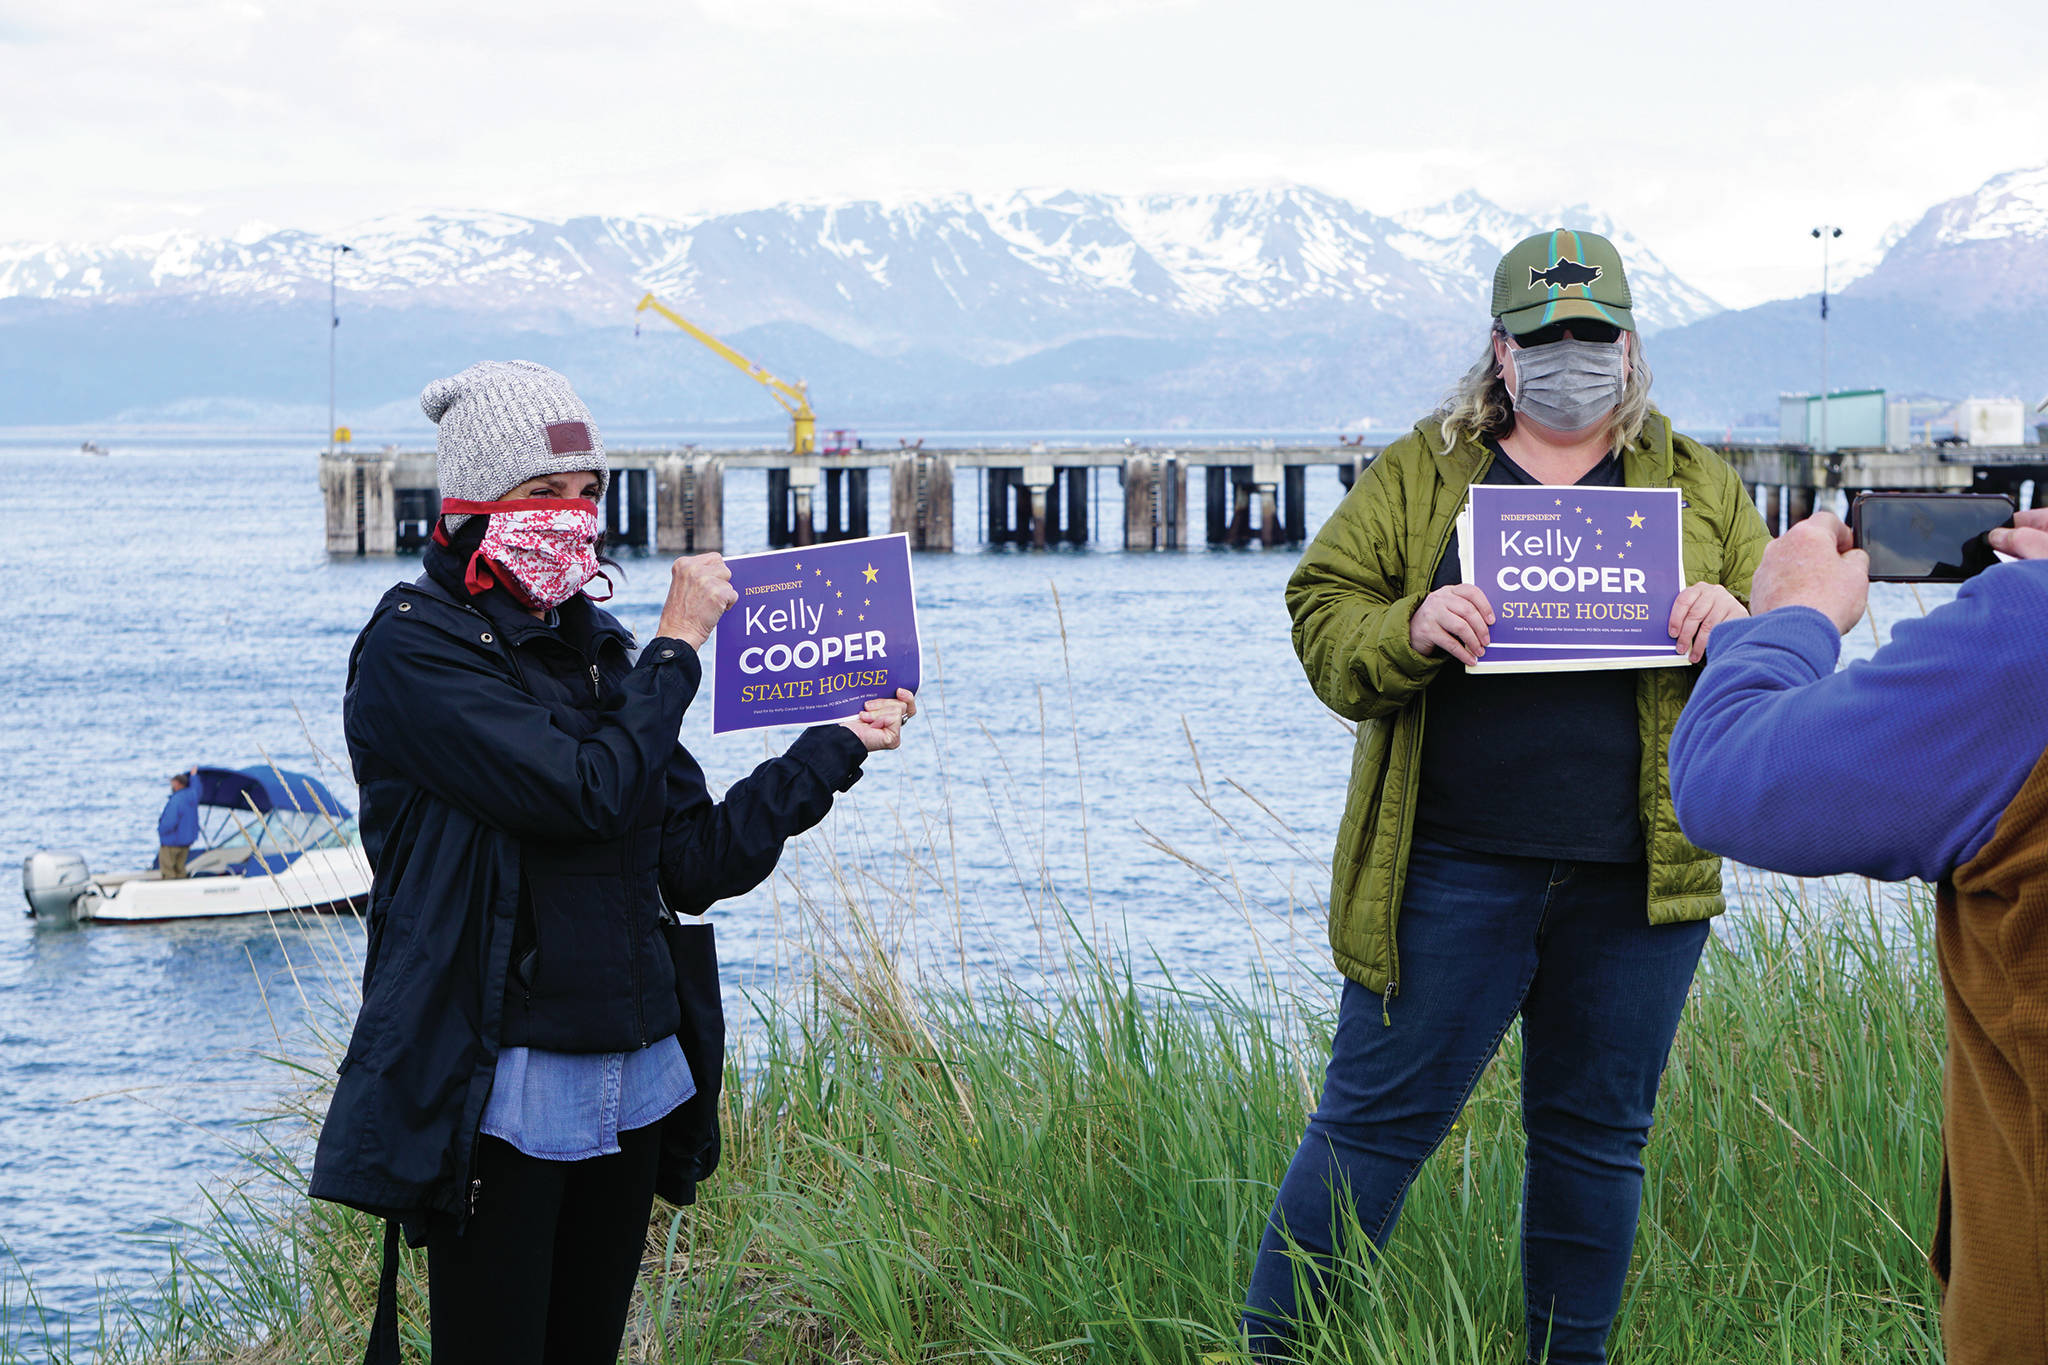 Melanie Dufour, left, and Bridget Maryott, center, pose for a photo for Dave Aplin, right, at Kelly Cooper’s “Rally on the Bay” campaign kick-off on Tuesday, May 26, 2020. Cooper spoke from the stern of the F/V Sea Nymph in Kachemak Bay near the Deep Water Dock in Homer, Alaska. About 50 people attended the rally from onshore, in fishing and pleasure boats, and in kayaks. (Photo by Michael Armstrong/Homer News)